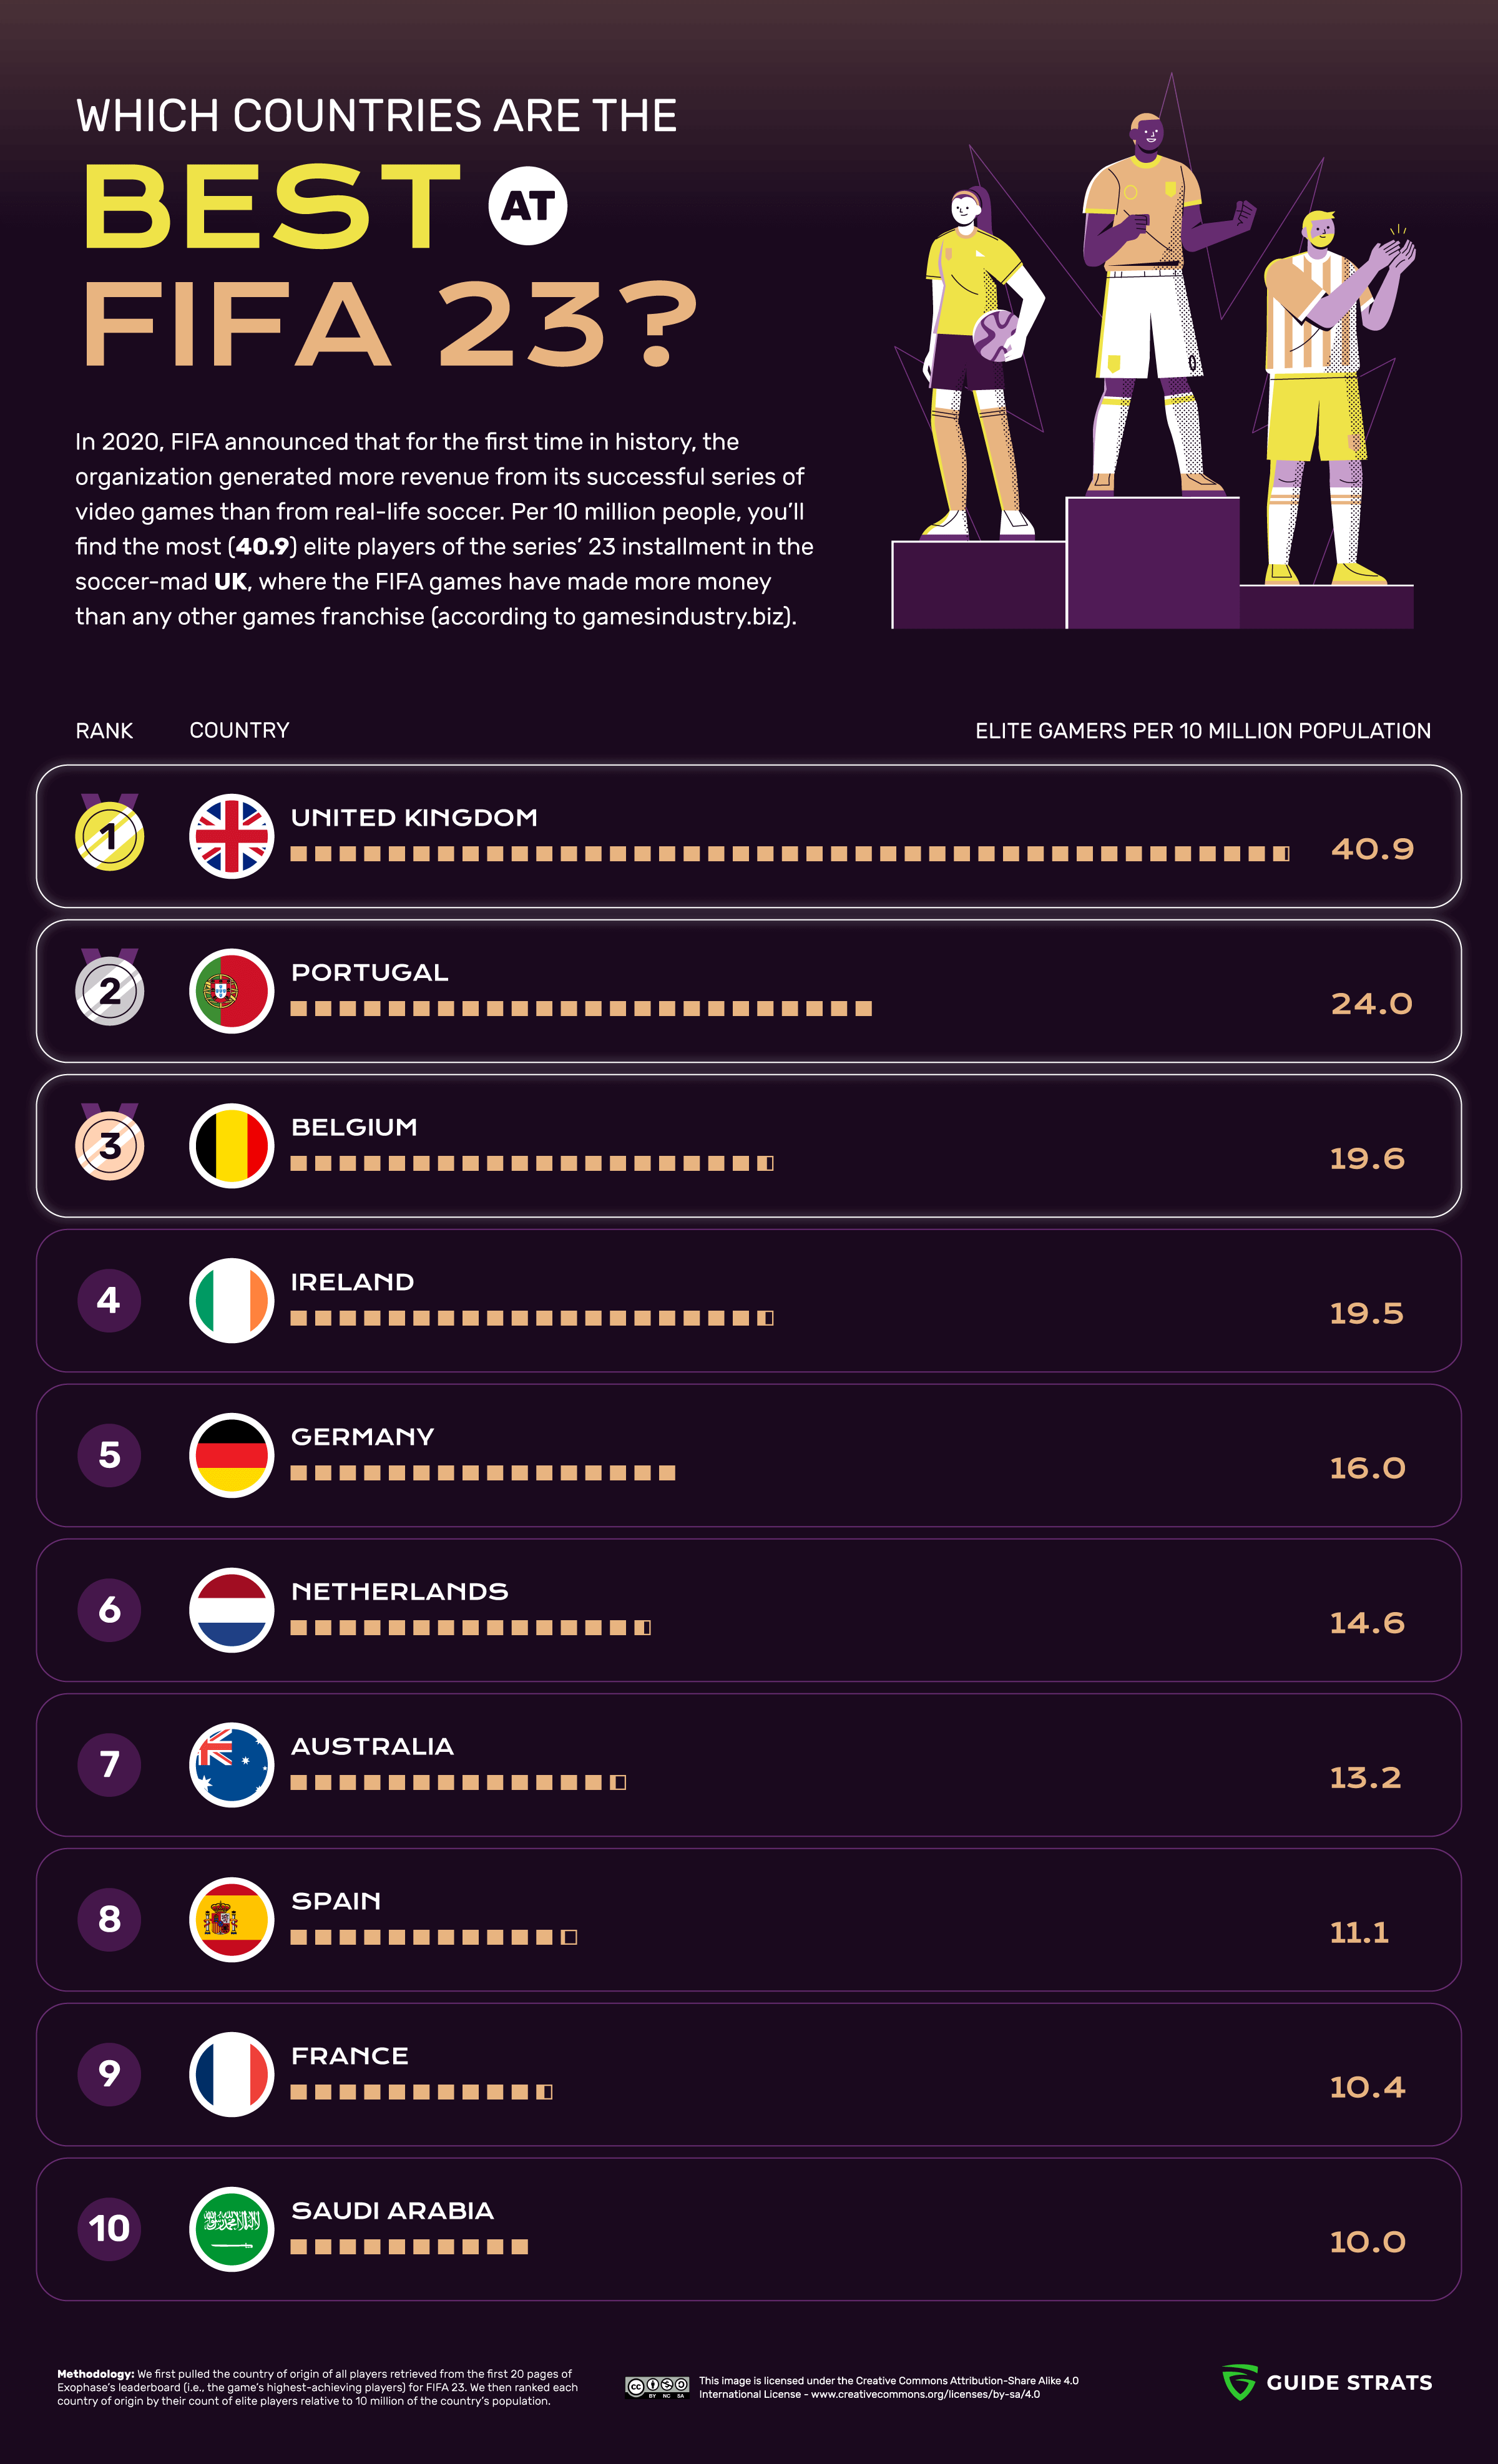 The Countries Best at FIFA Games (Infographic)